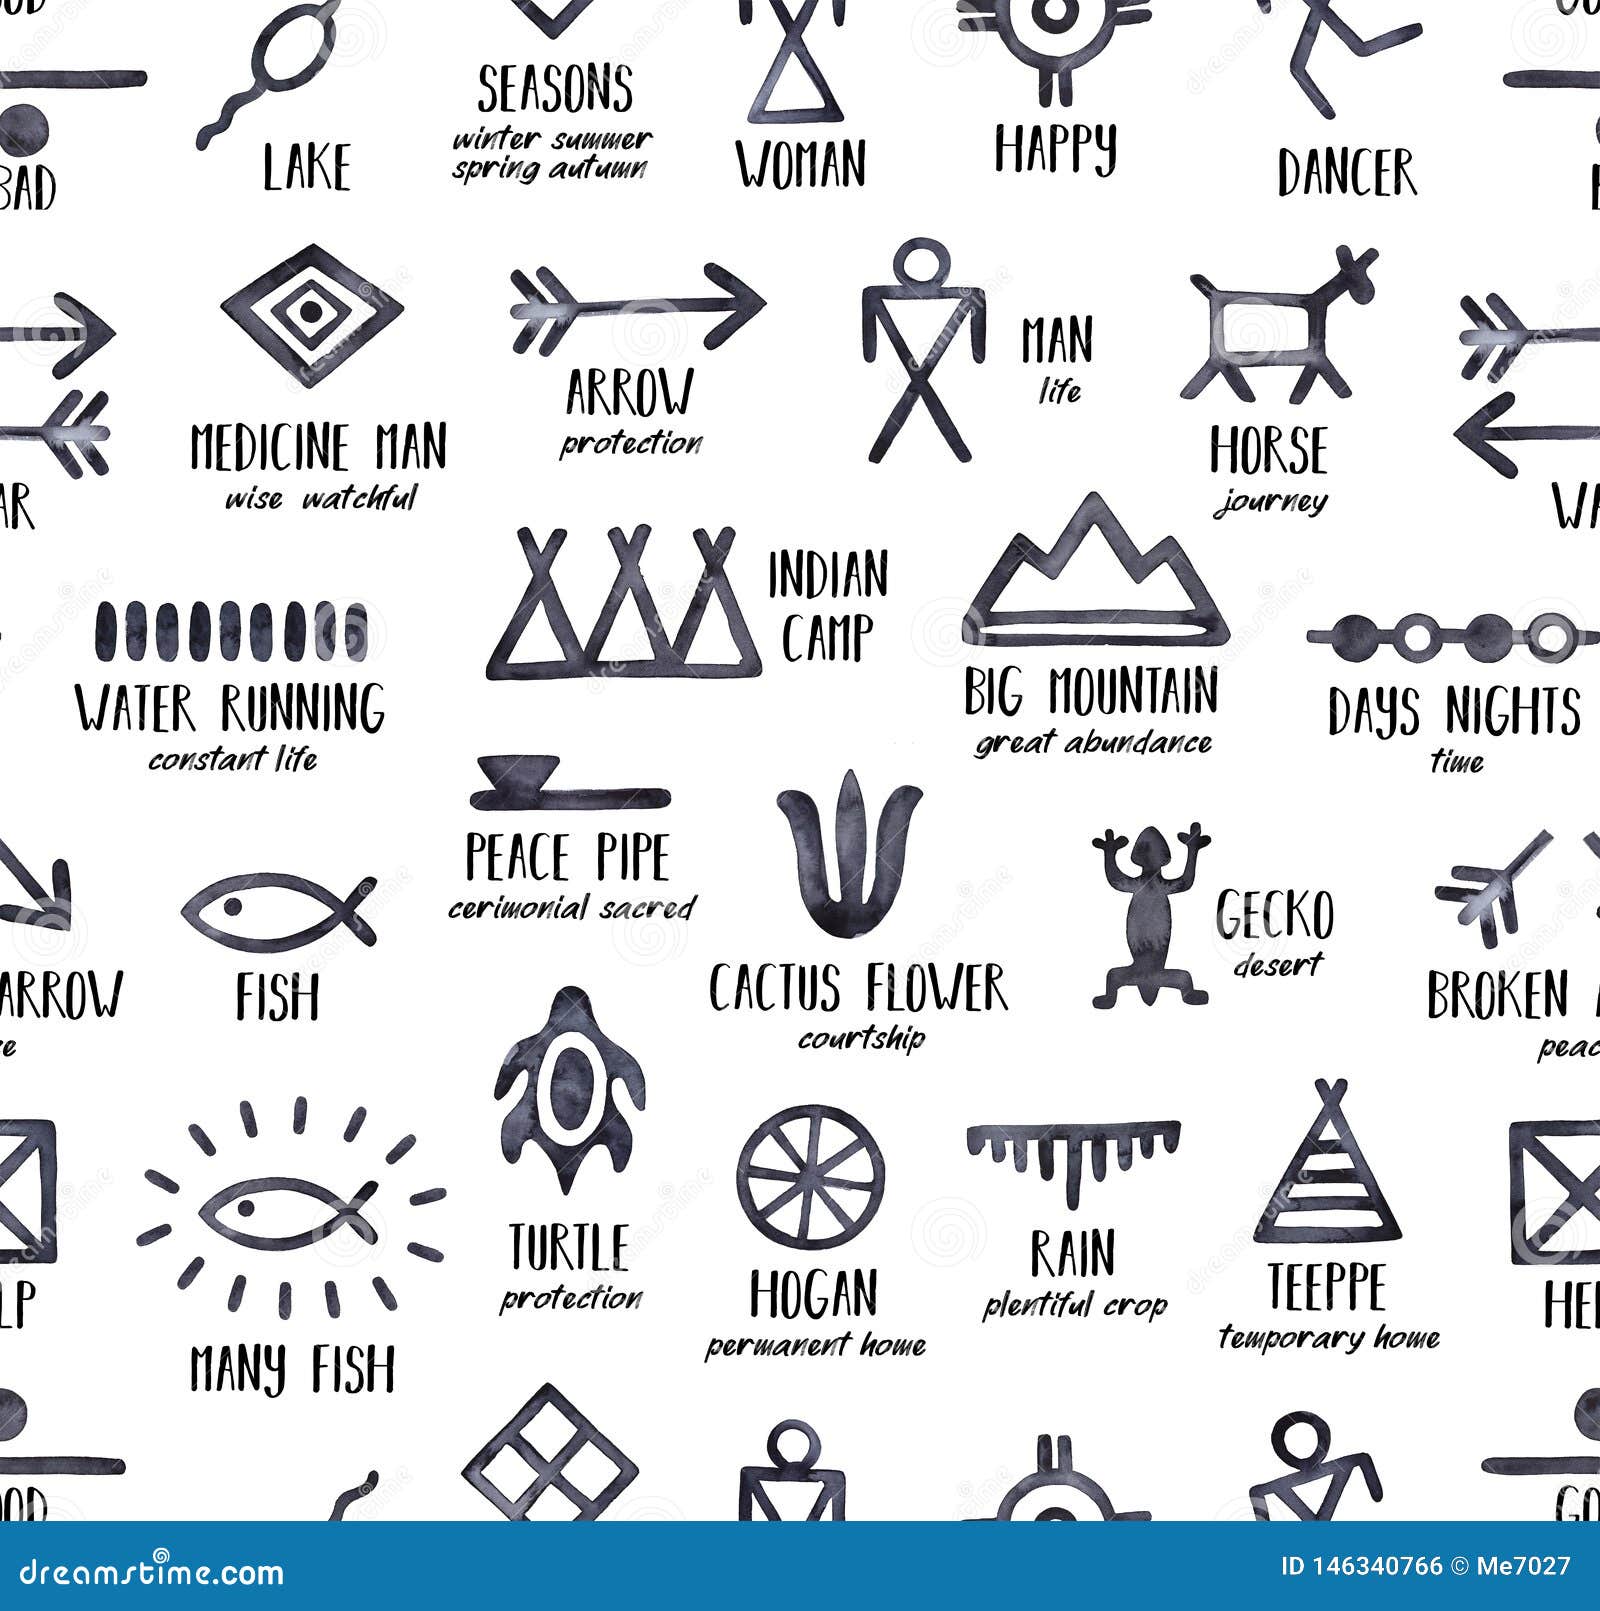 Native American Symbols Their Meanings